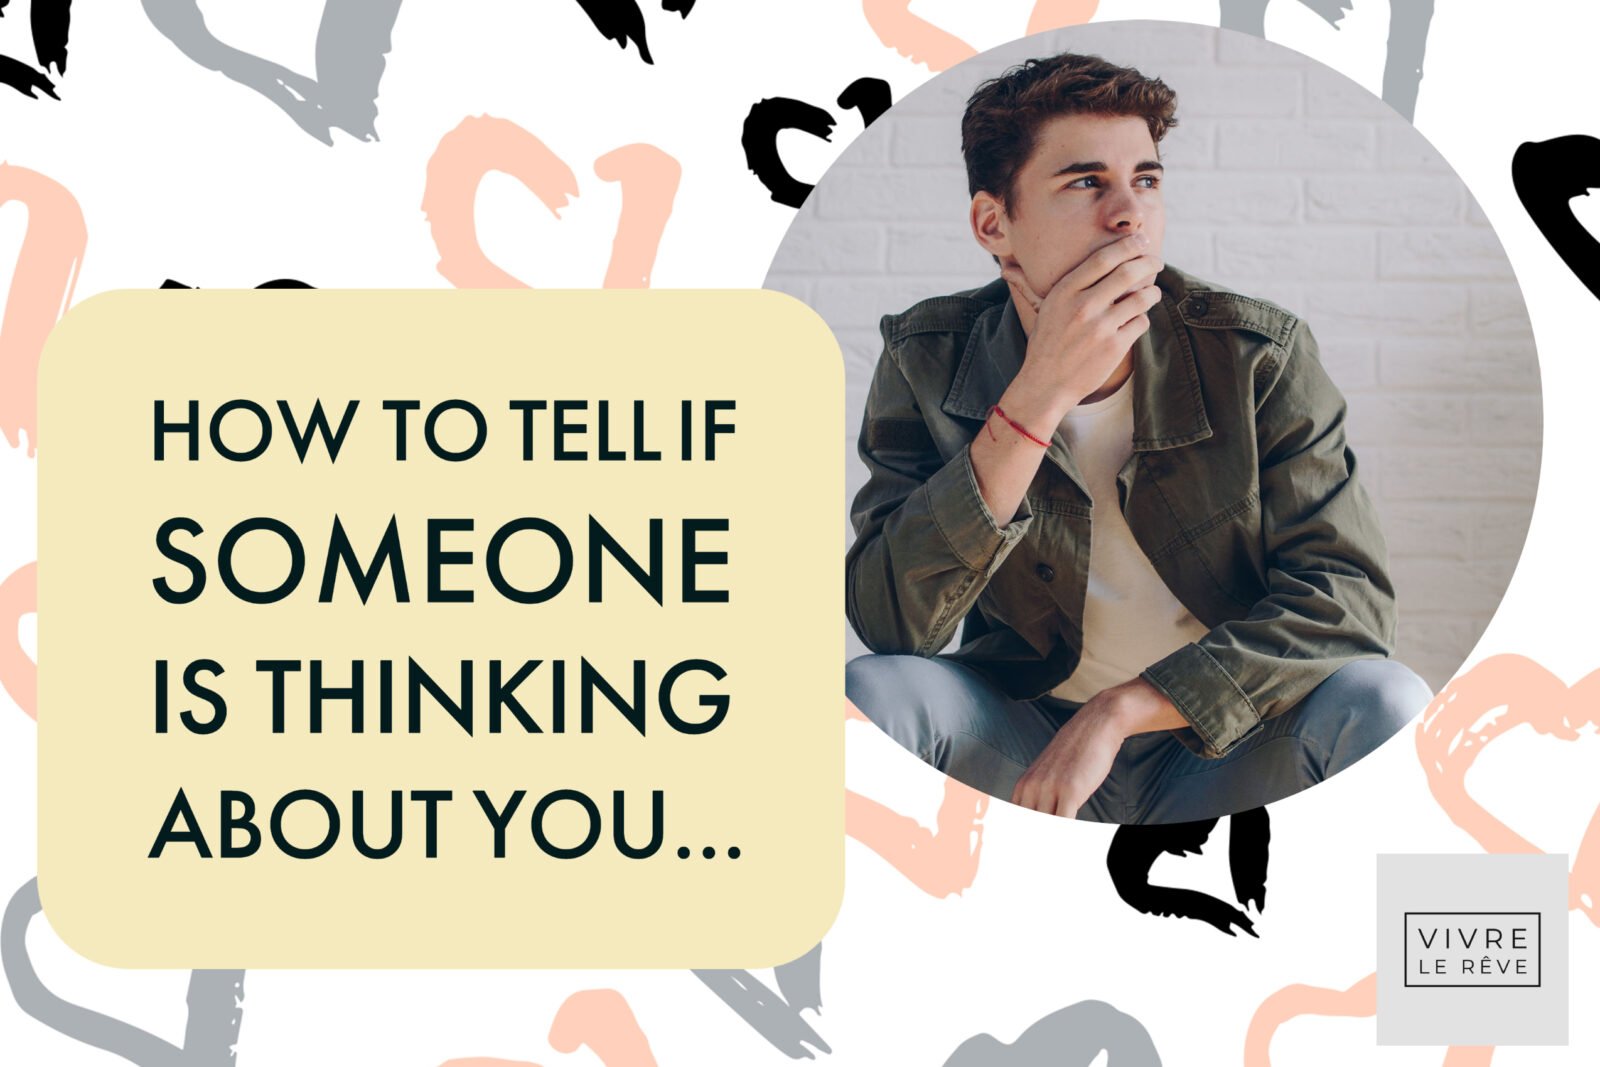 How to Tell if Someone is Thinking About You...